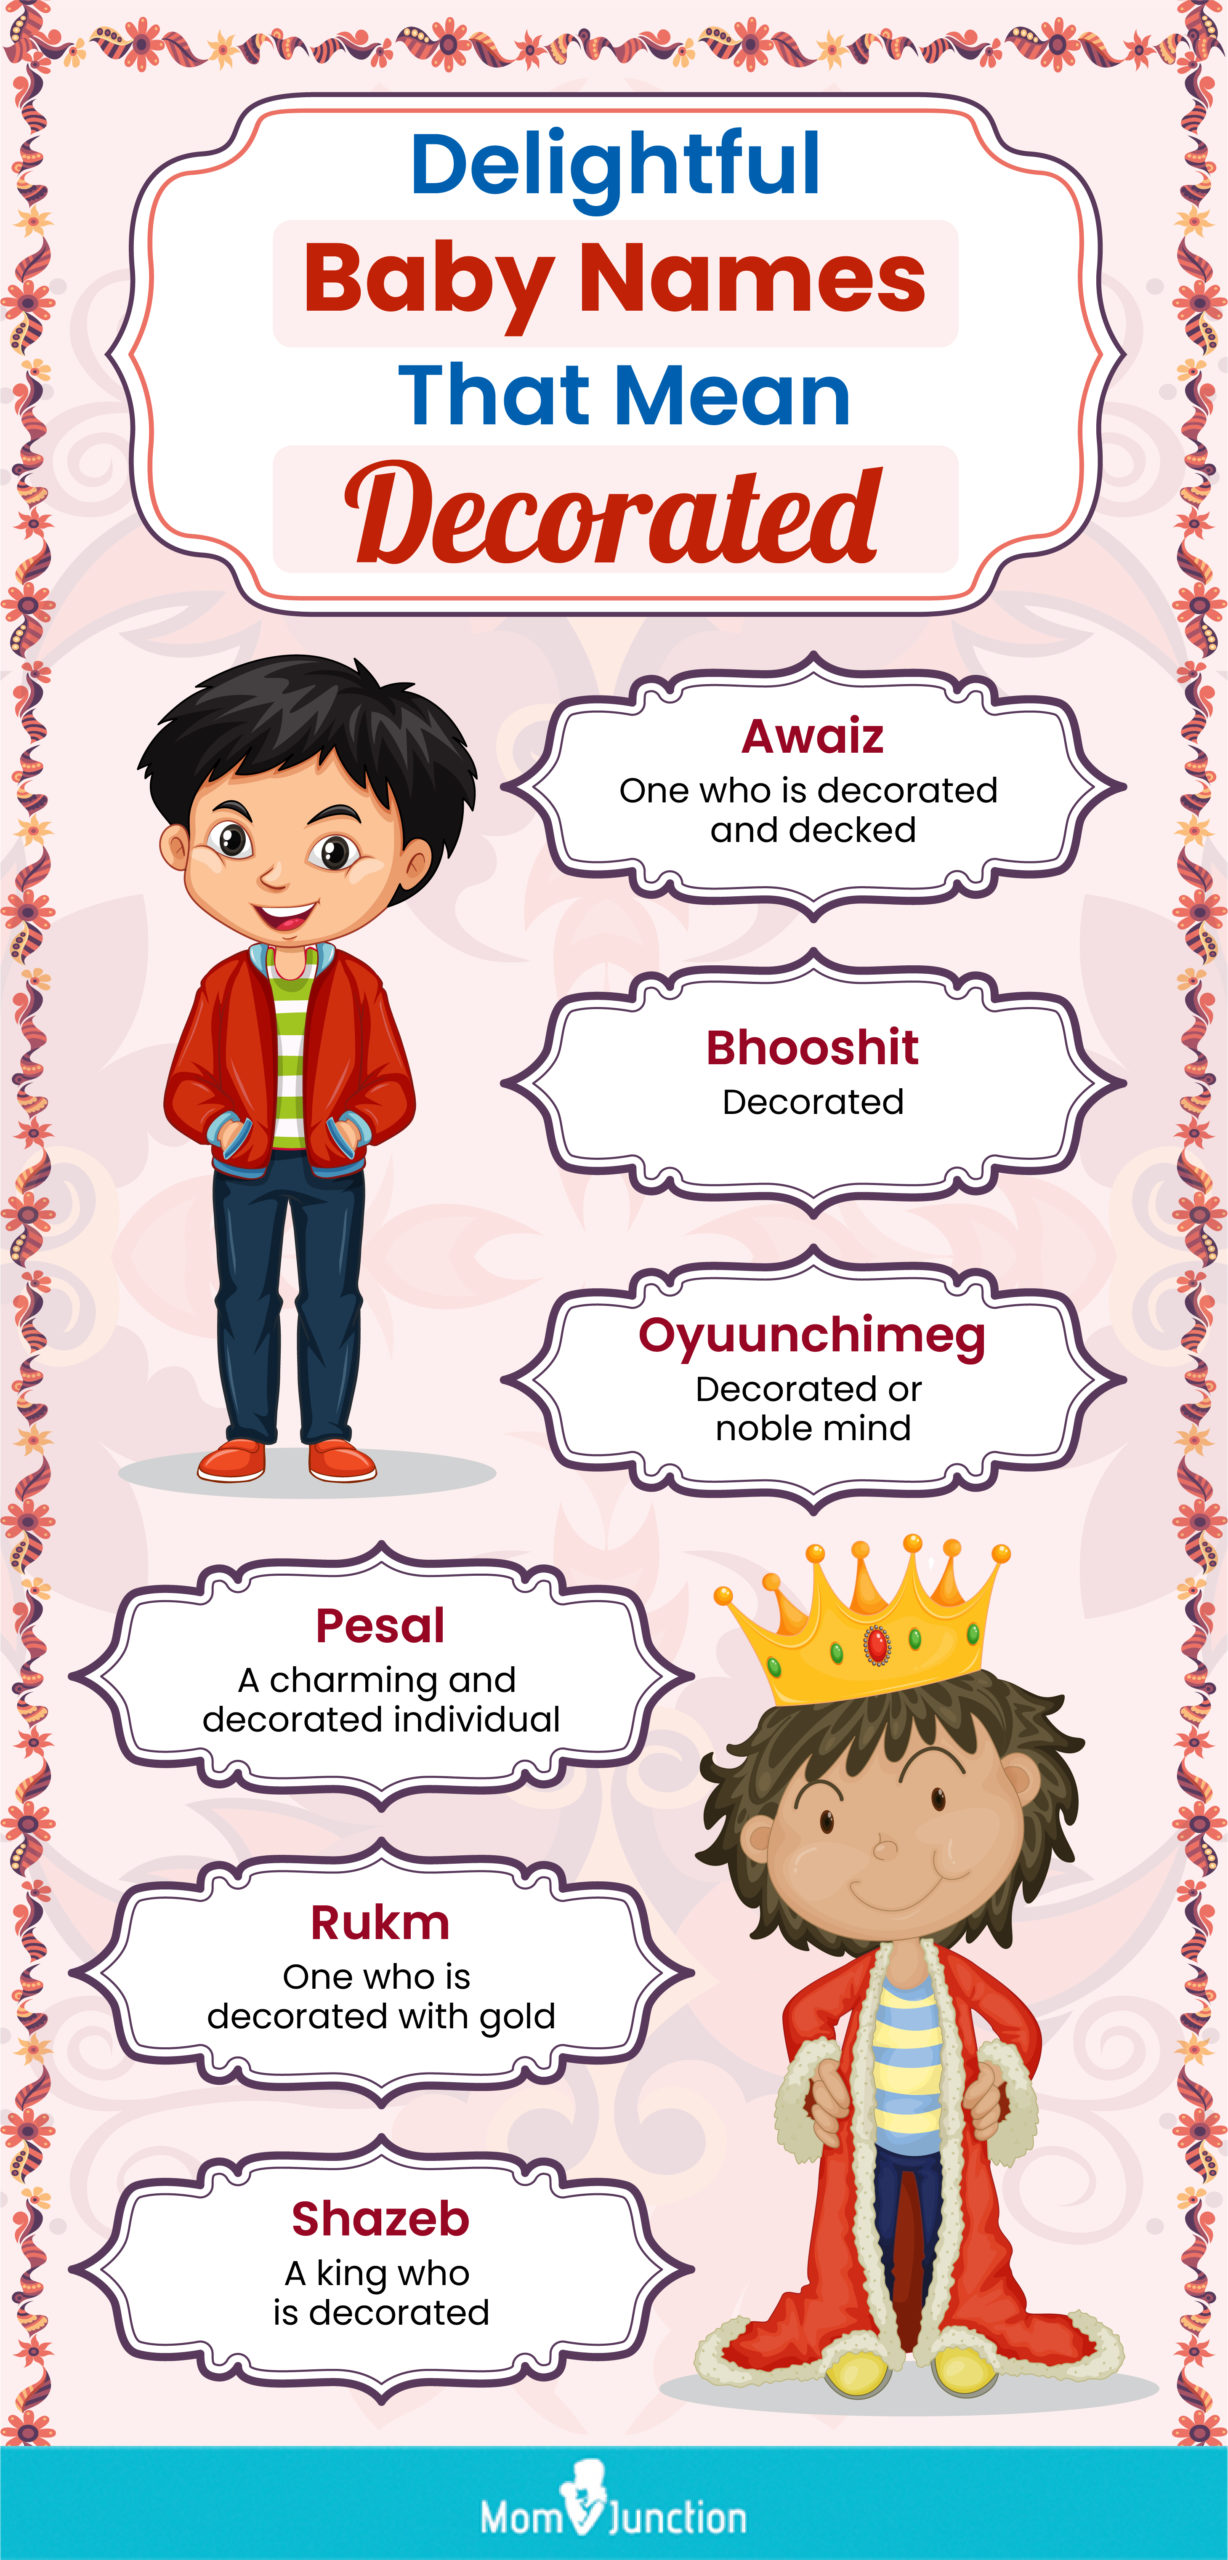 delightful baby names that mean decorated (infographic)